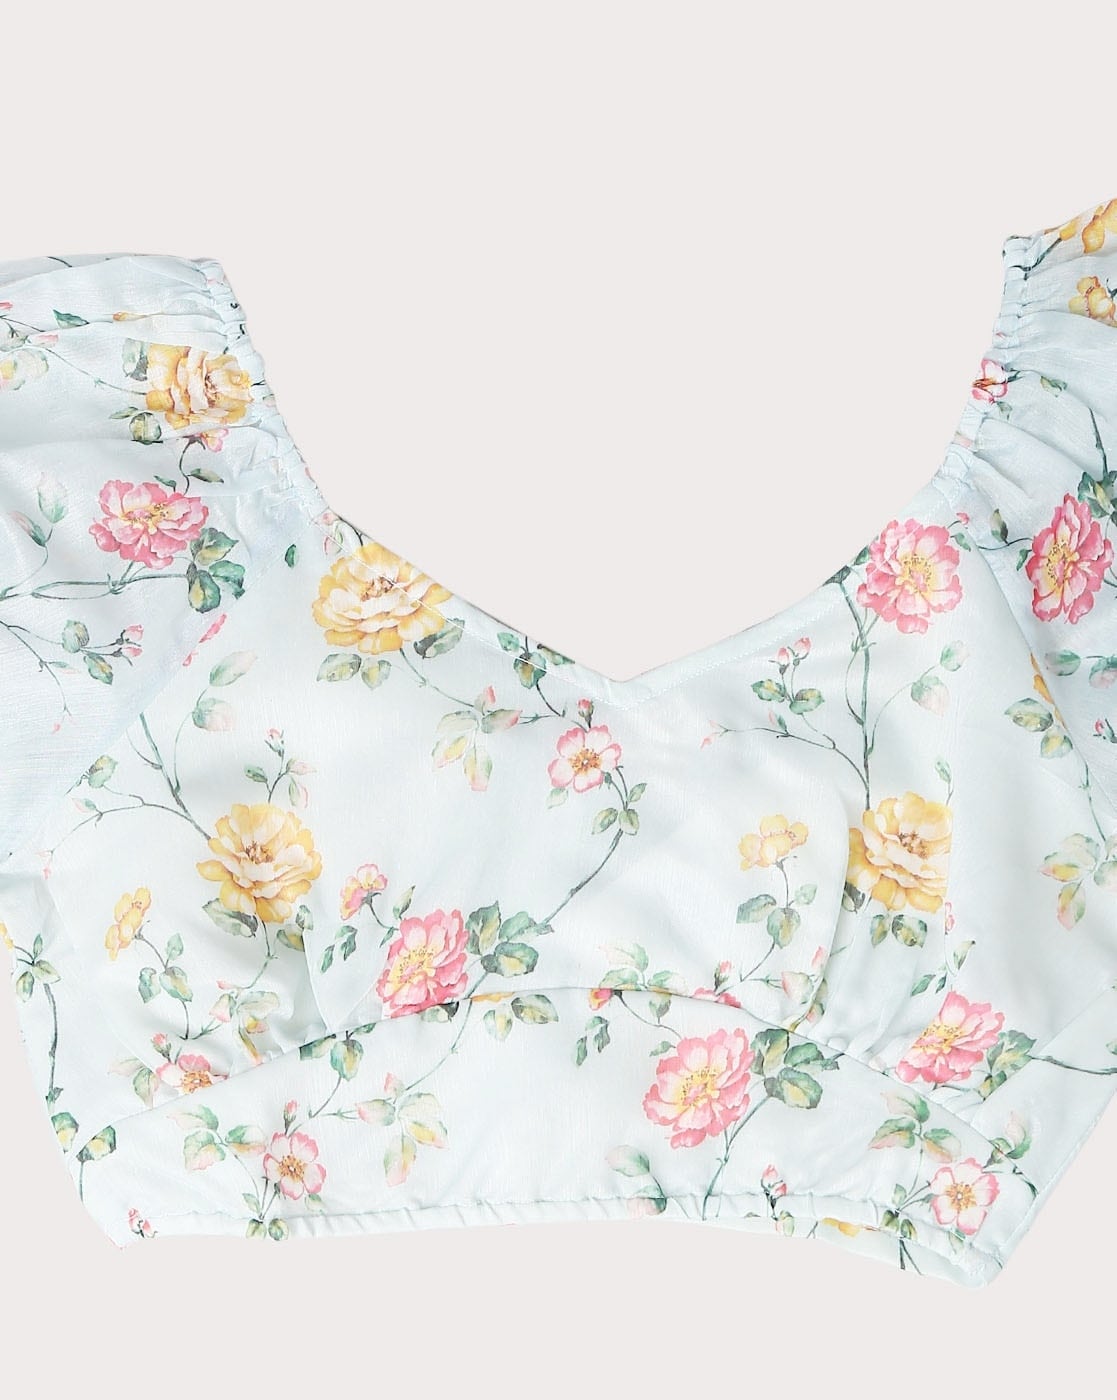 SAVE & SHARE* Myntra Crop Tops Haul Starting at ₹200!!🌷🦢🤍✨🌺 Review:  First top - This is the best floral top I've in my